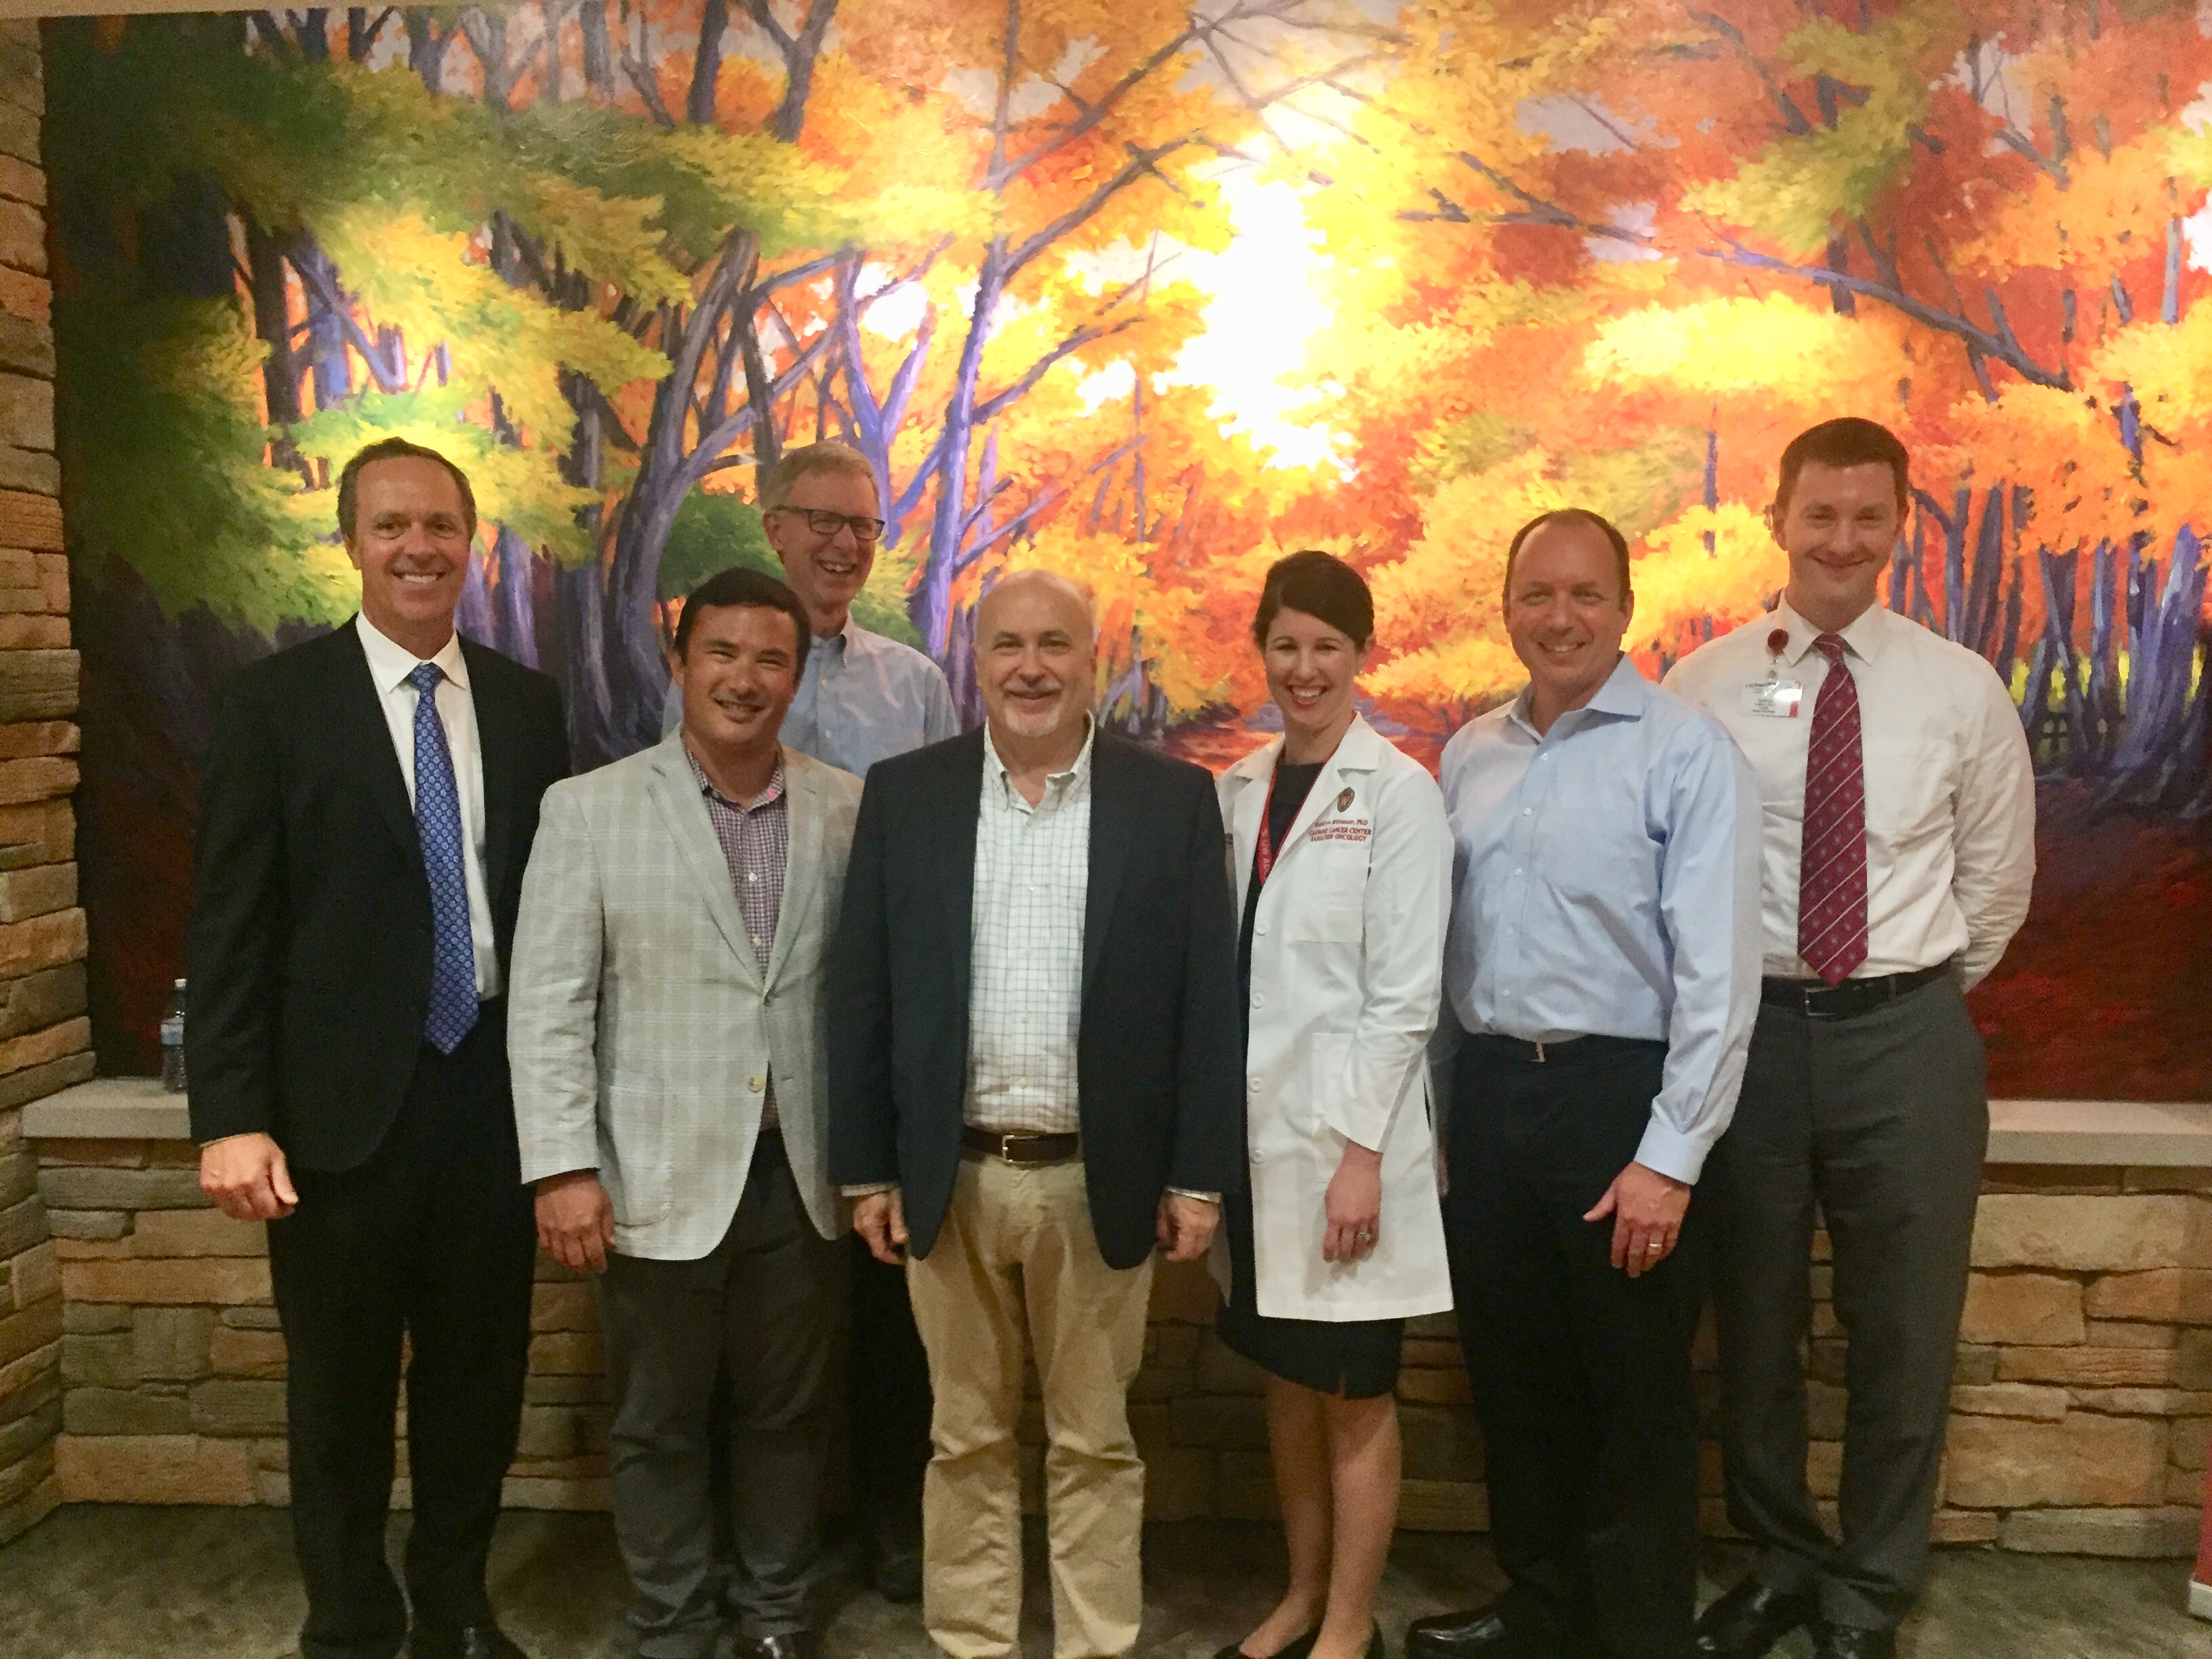 L to R) DHO Department Chairman Dr. Paul Harari, DHO Associate Professor Dr. Randy Kimple, Patient Advocate Marshall Flax, U.S. Representative Mark Pocan, DHO Staff Physicist Dr. Kathryn Mittauer, Patient Advocate Randy Eggert and DHO Assistant Professor Zac Labby.